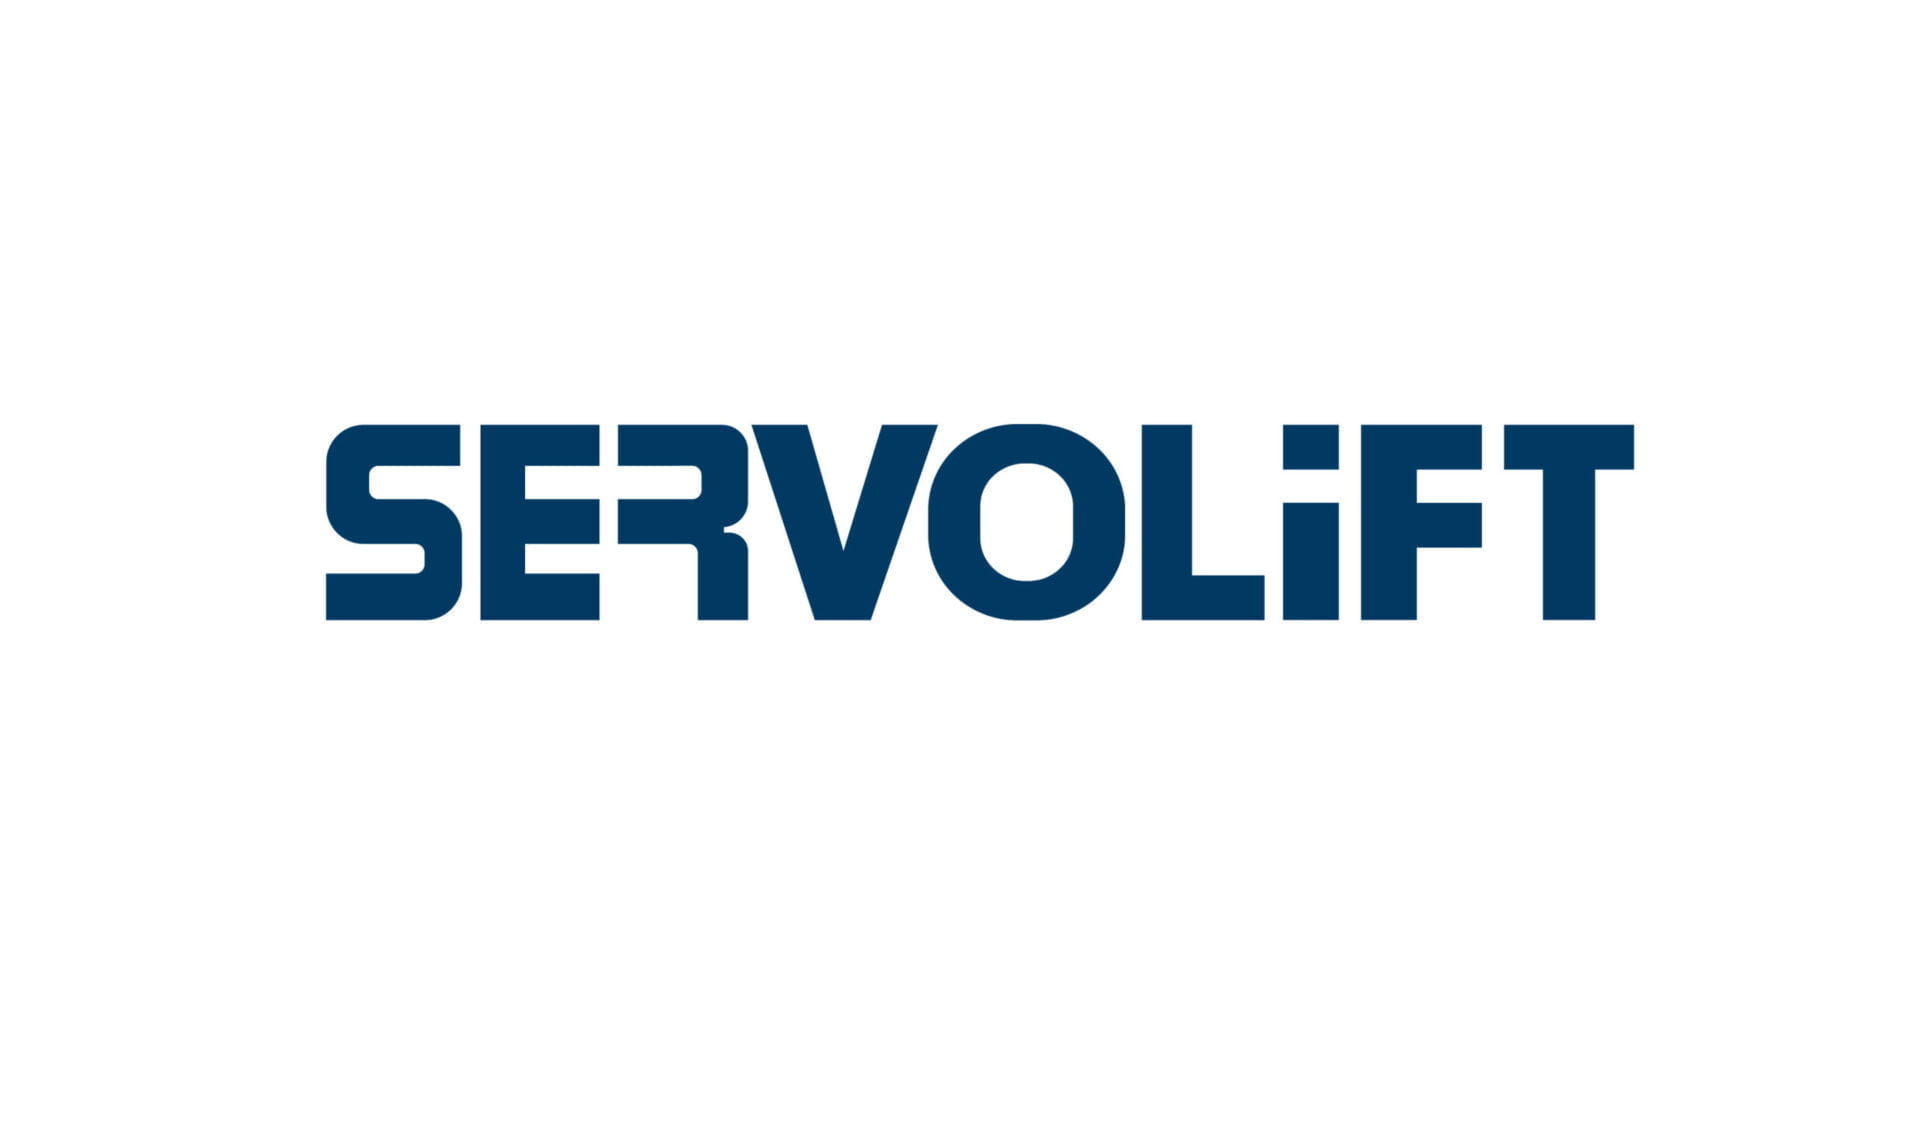 Servolift logo in bold blue text with stylized lettering